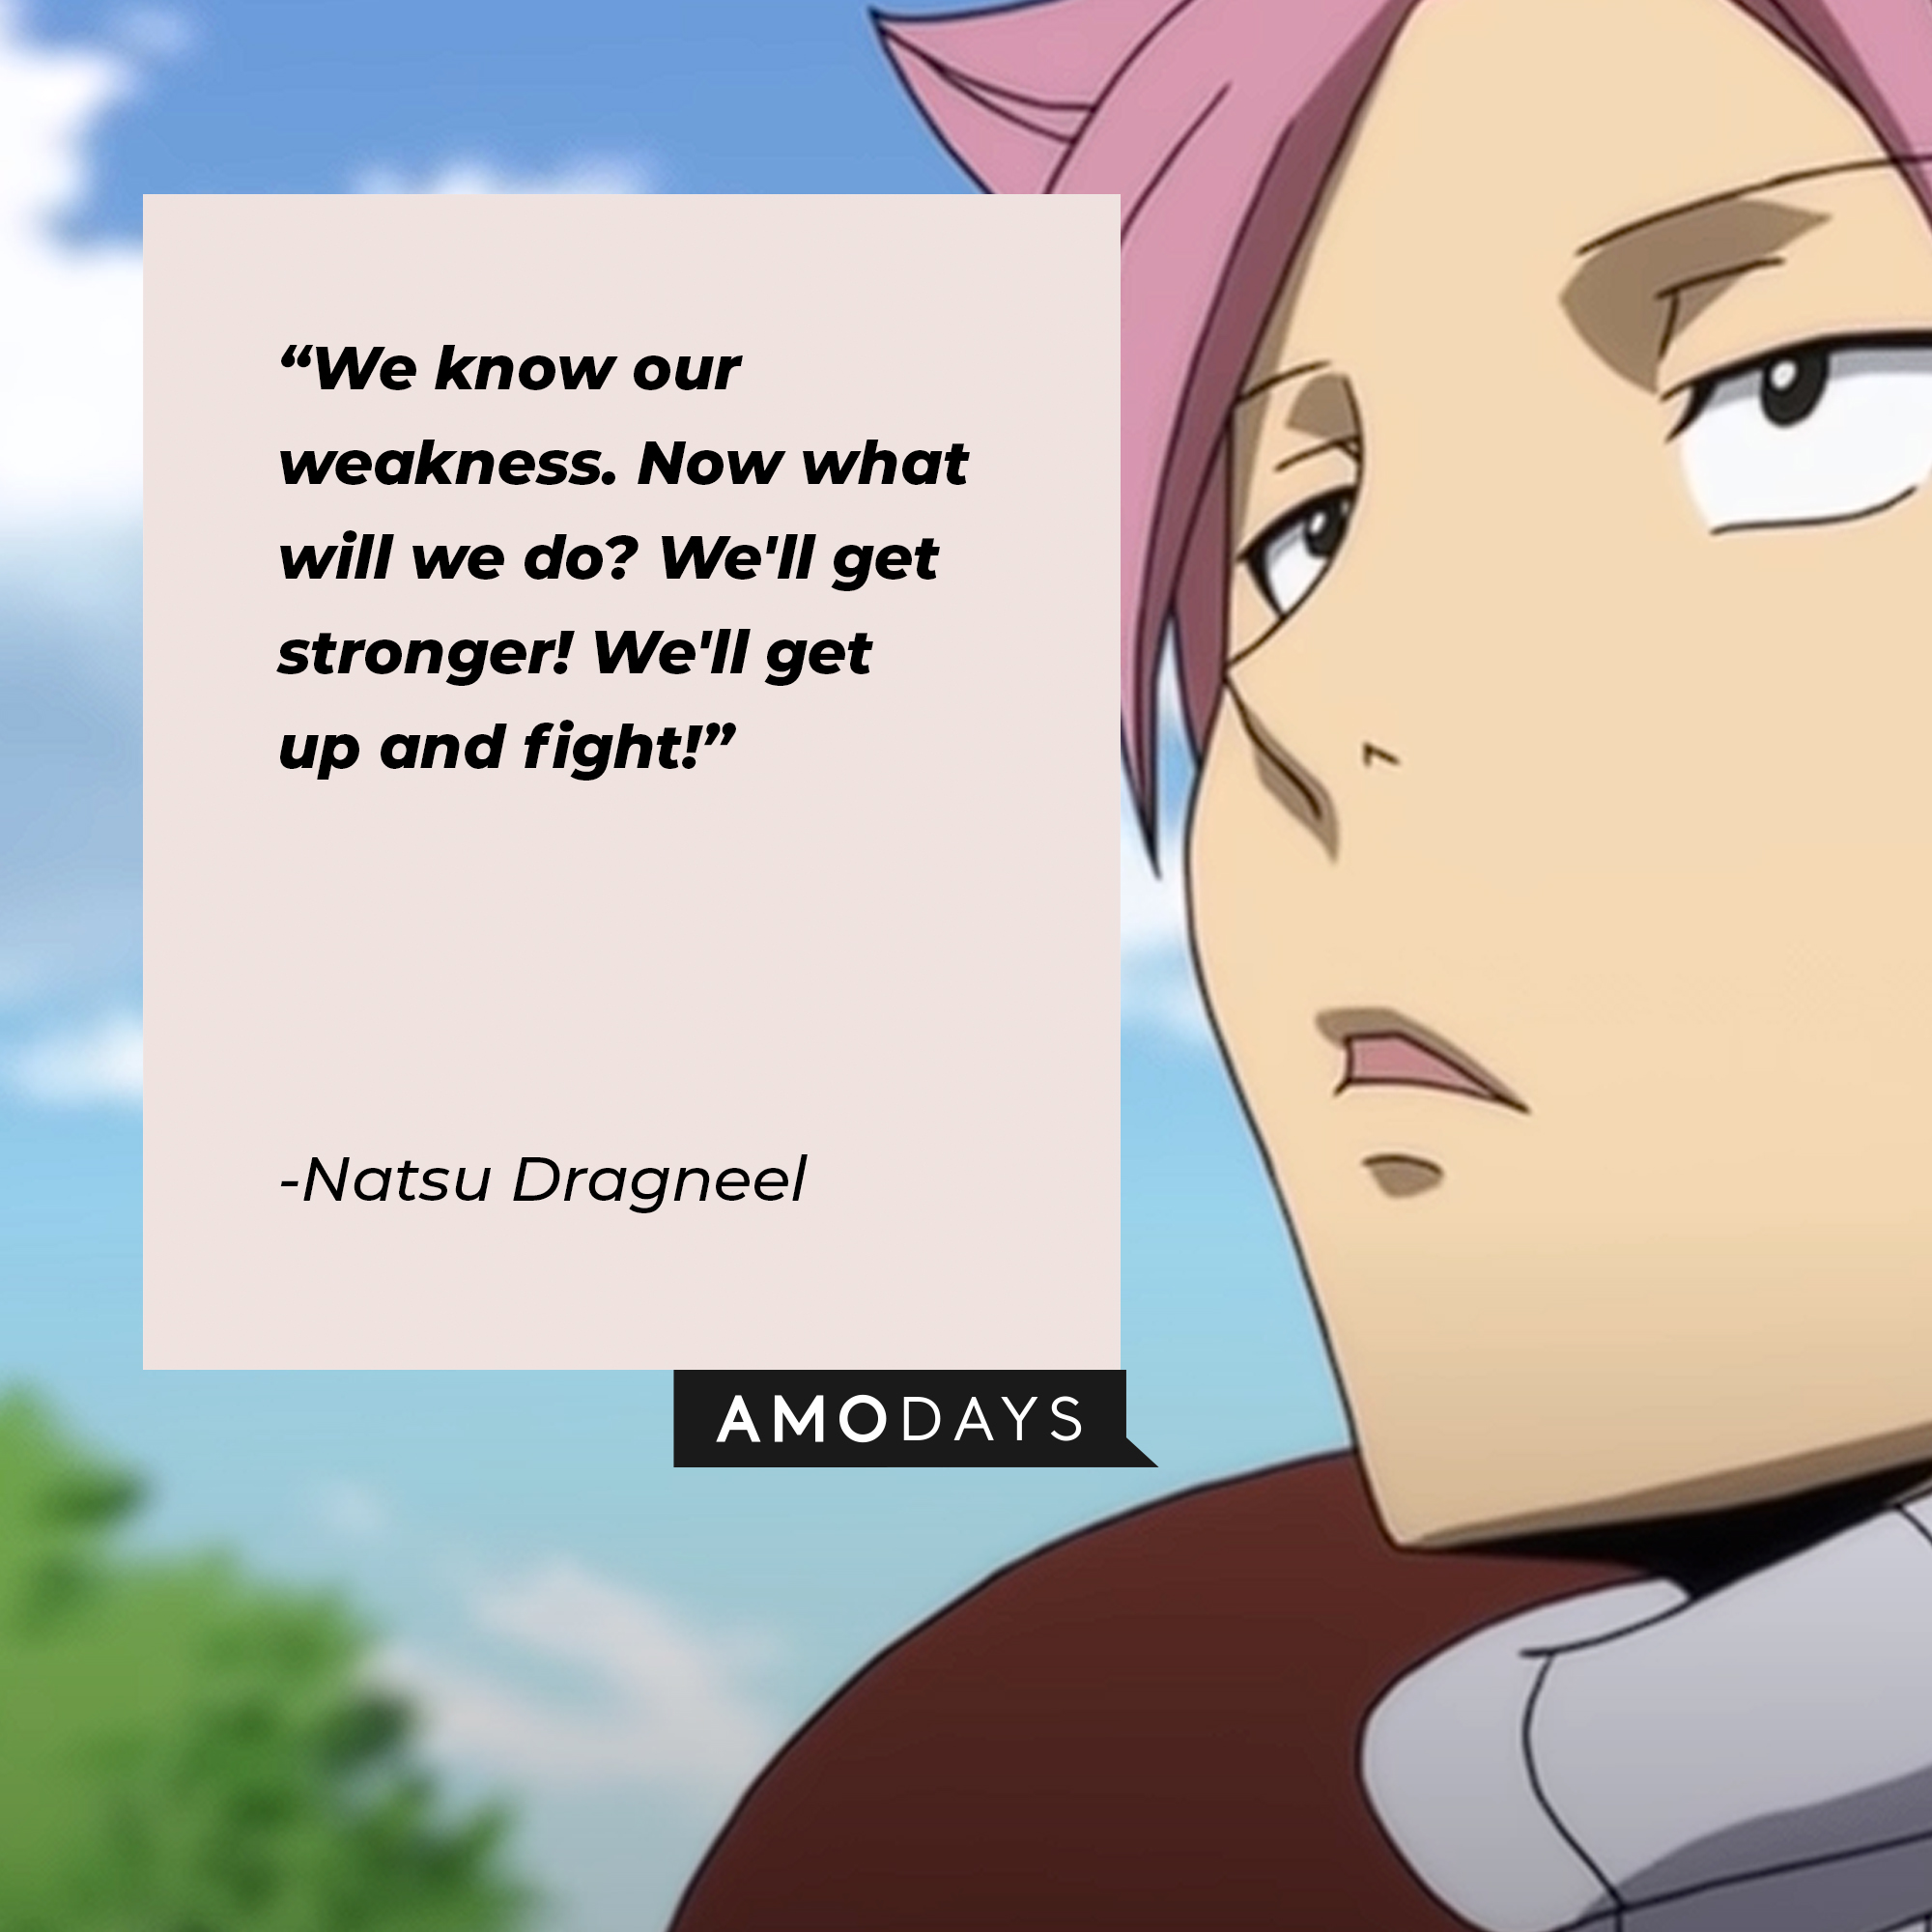 Natsu Dragneel's quote: "We know our weakness. Now what will we do? We'll get stronger! We'll get up and fight!" | Image: AmoDays